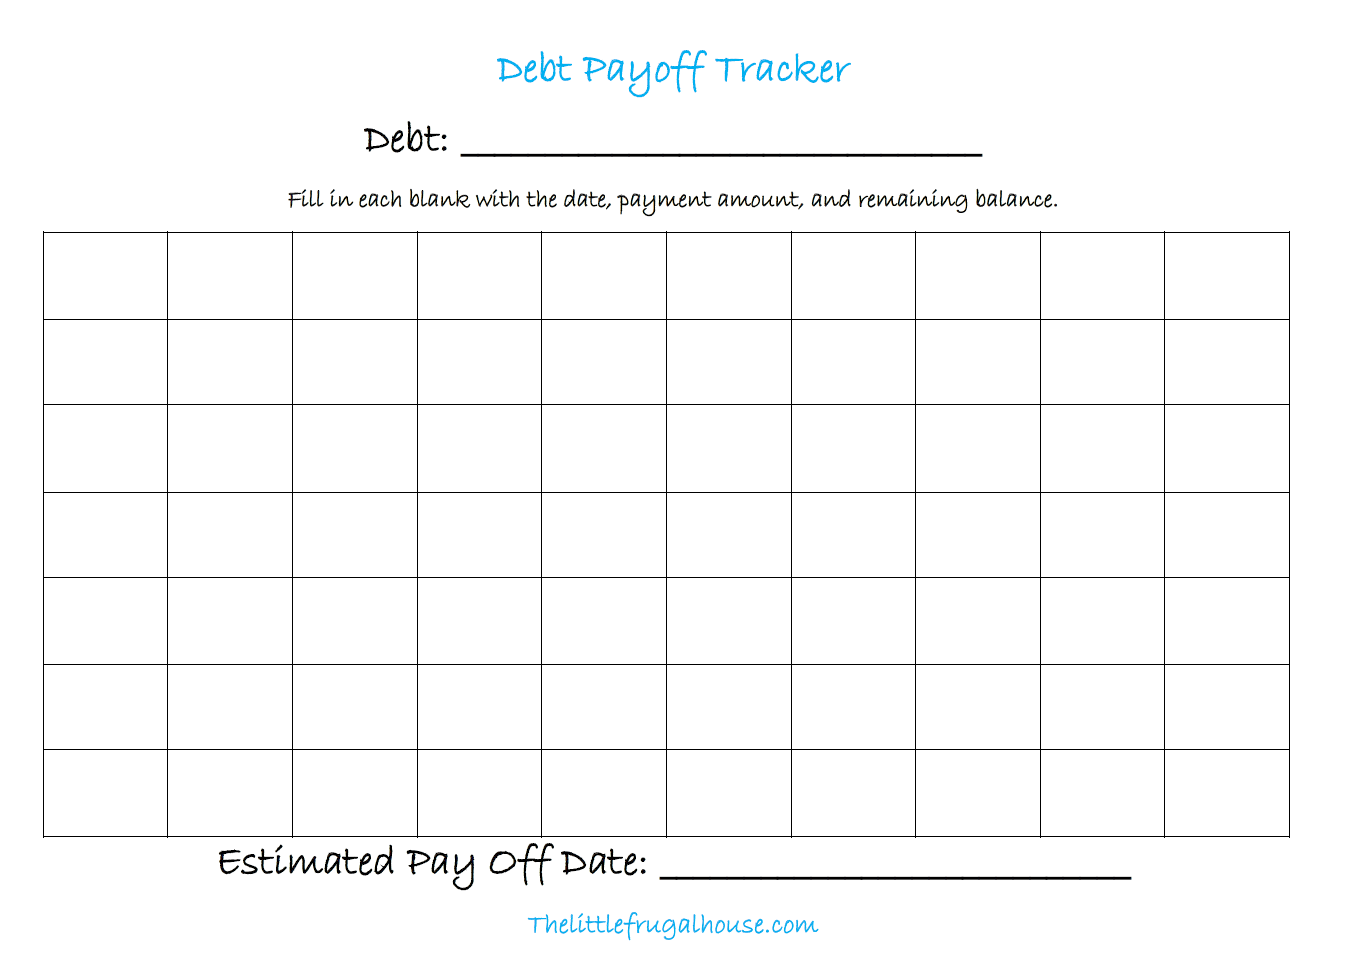 free-debt-payoff-tracker-printables-the-little-frugal-house